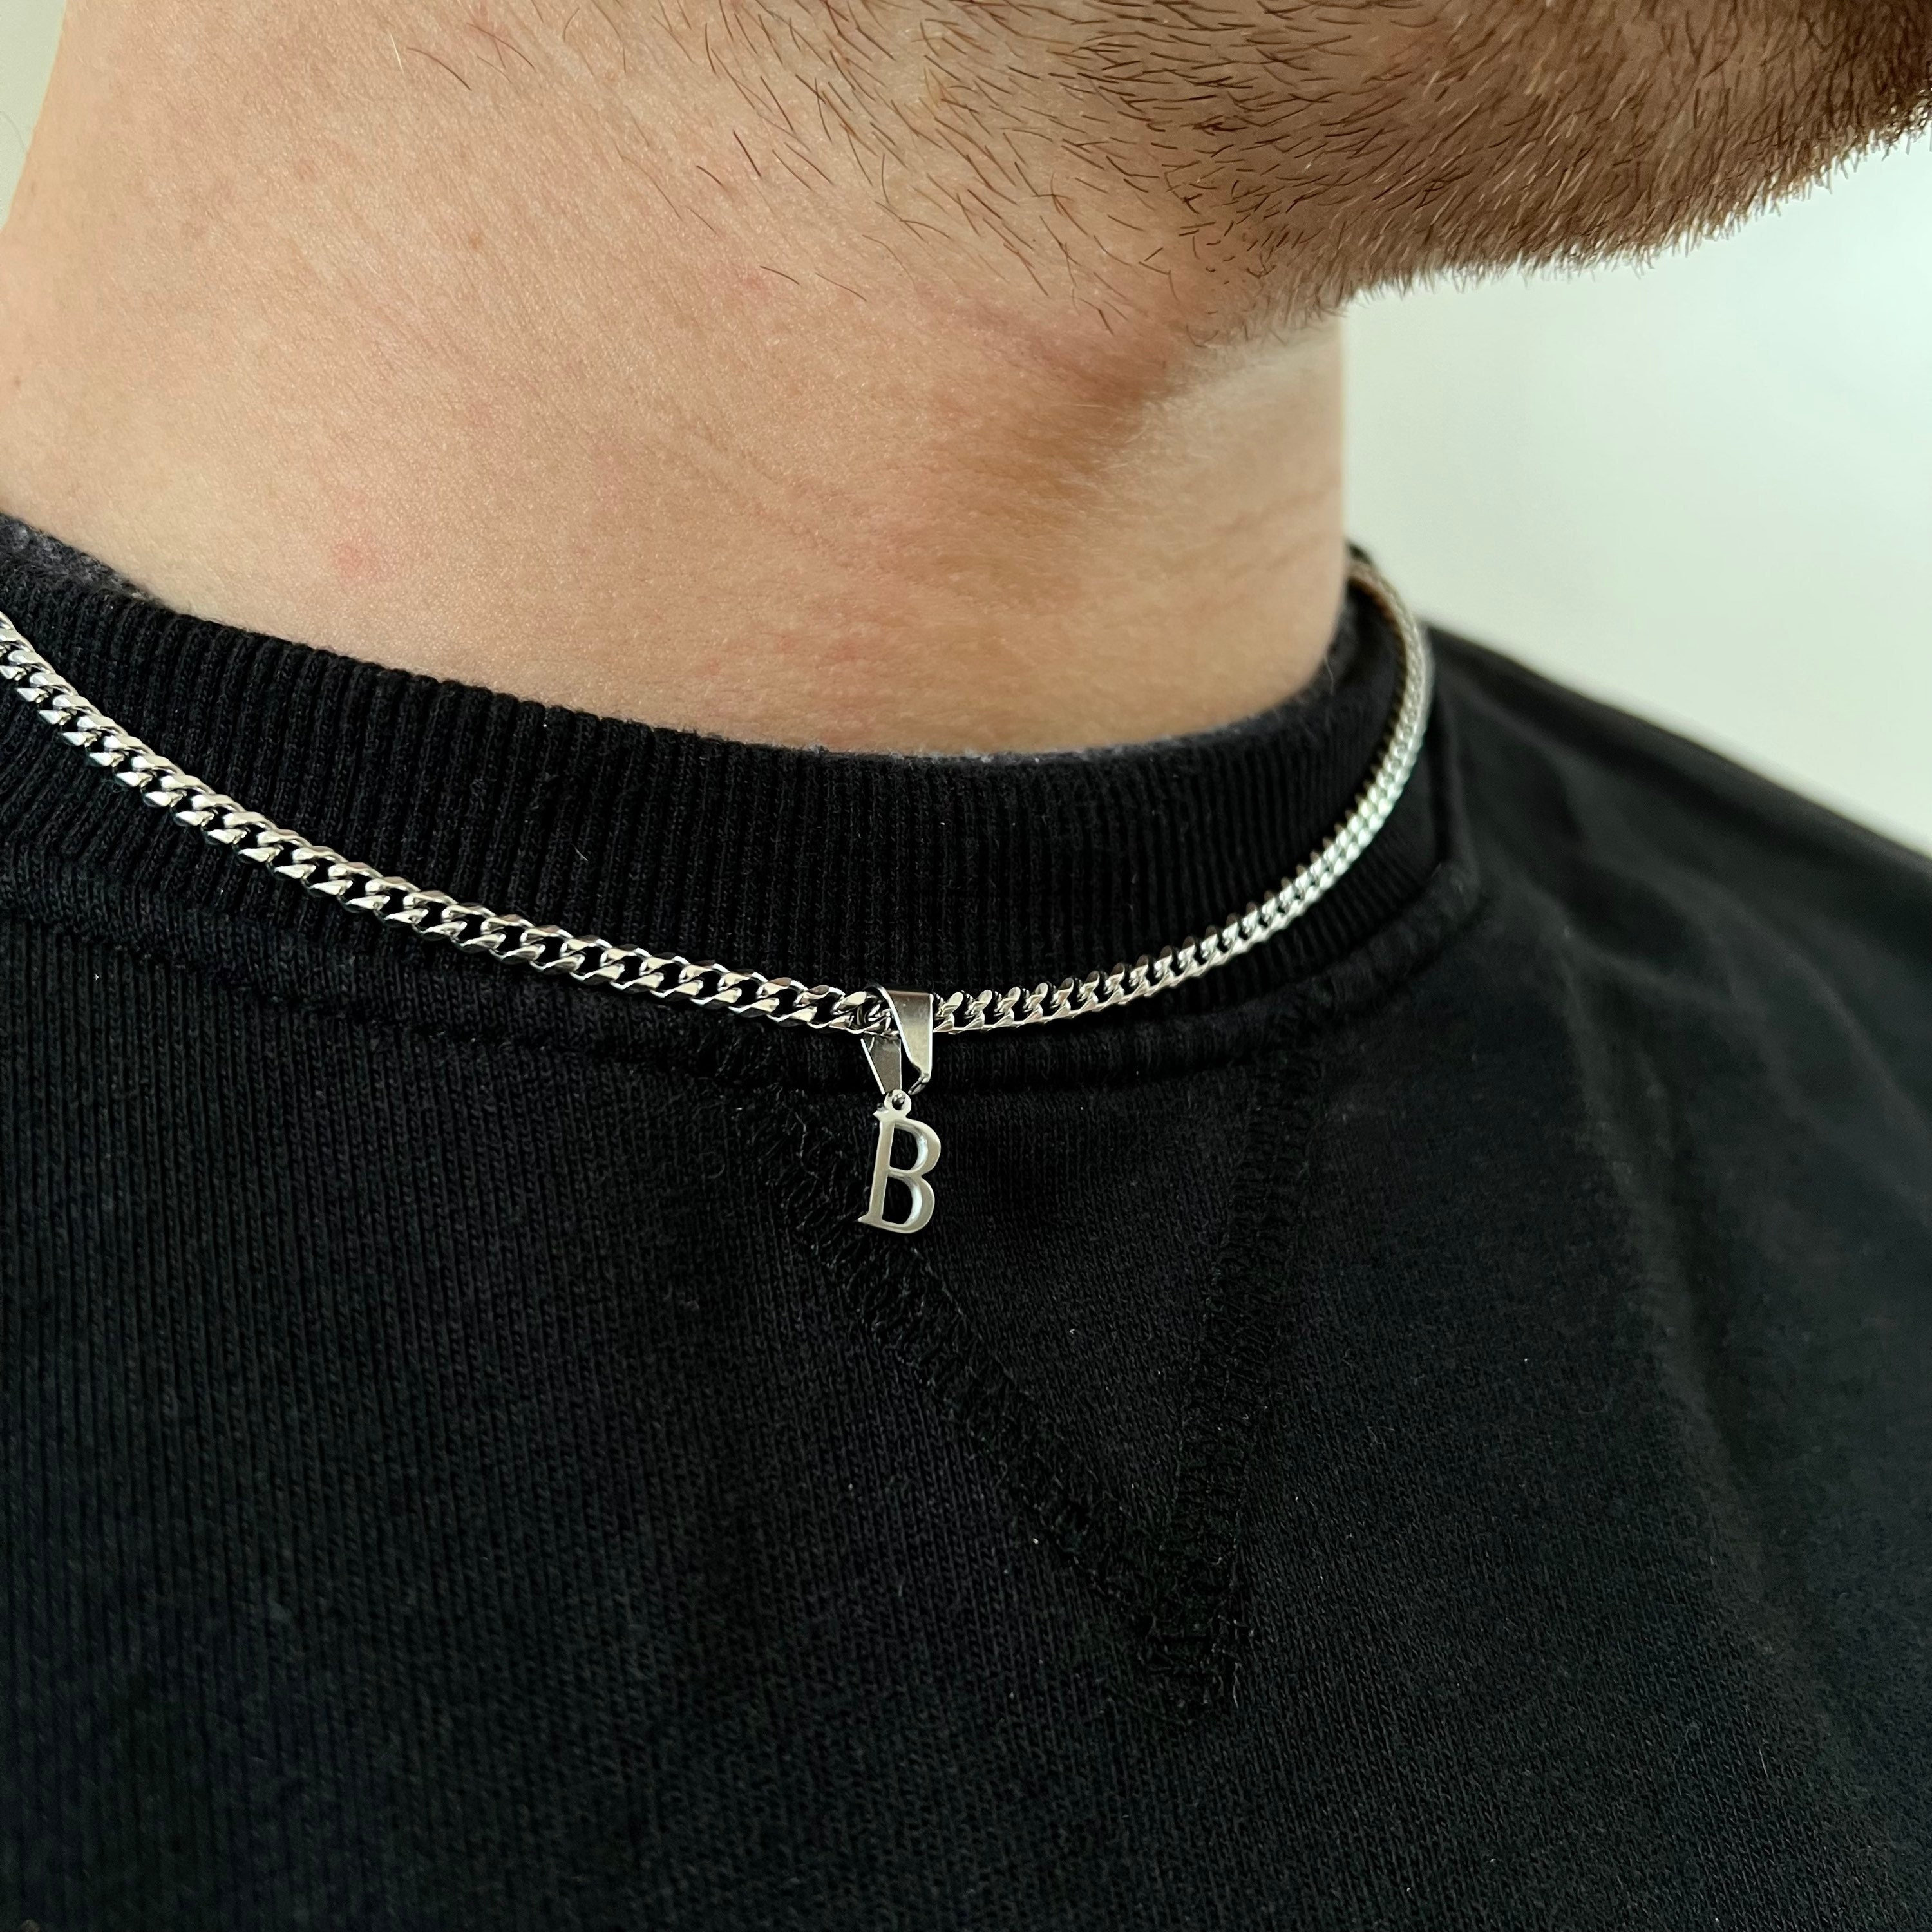  Letter necklace for men, men's initial necklace, stainless  steel chain, personalized, silver necklace, mens jewelry, alphabet necklace,  gift : Handmade Products